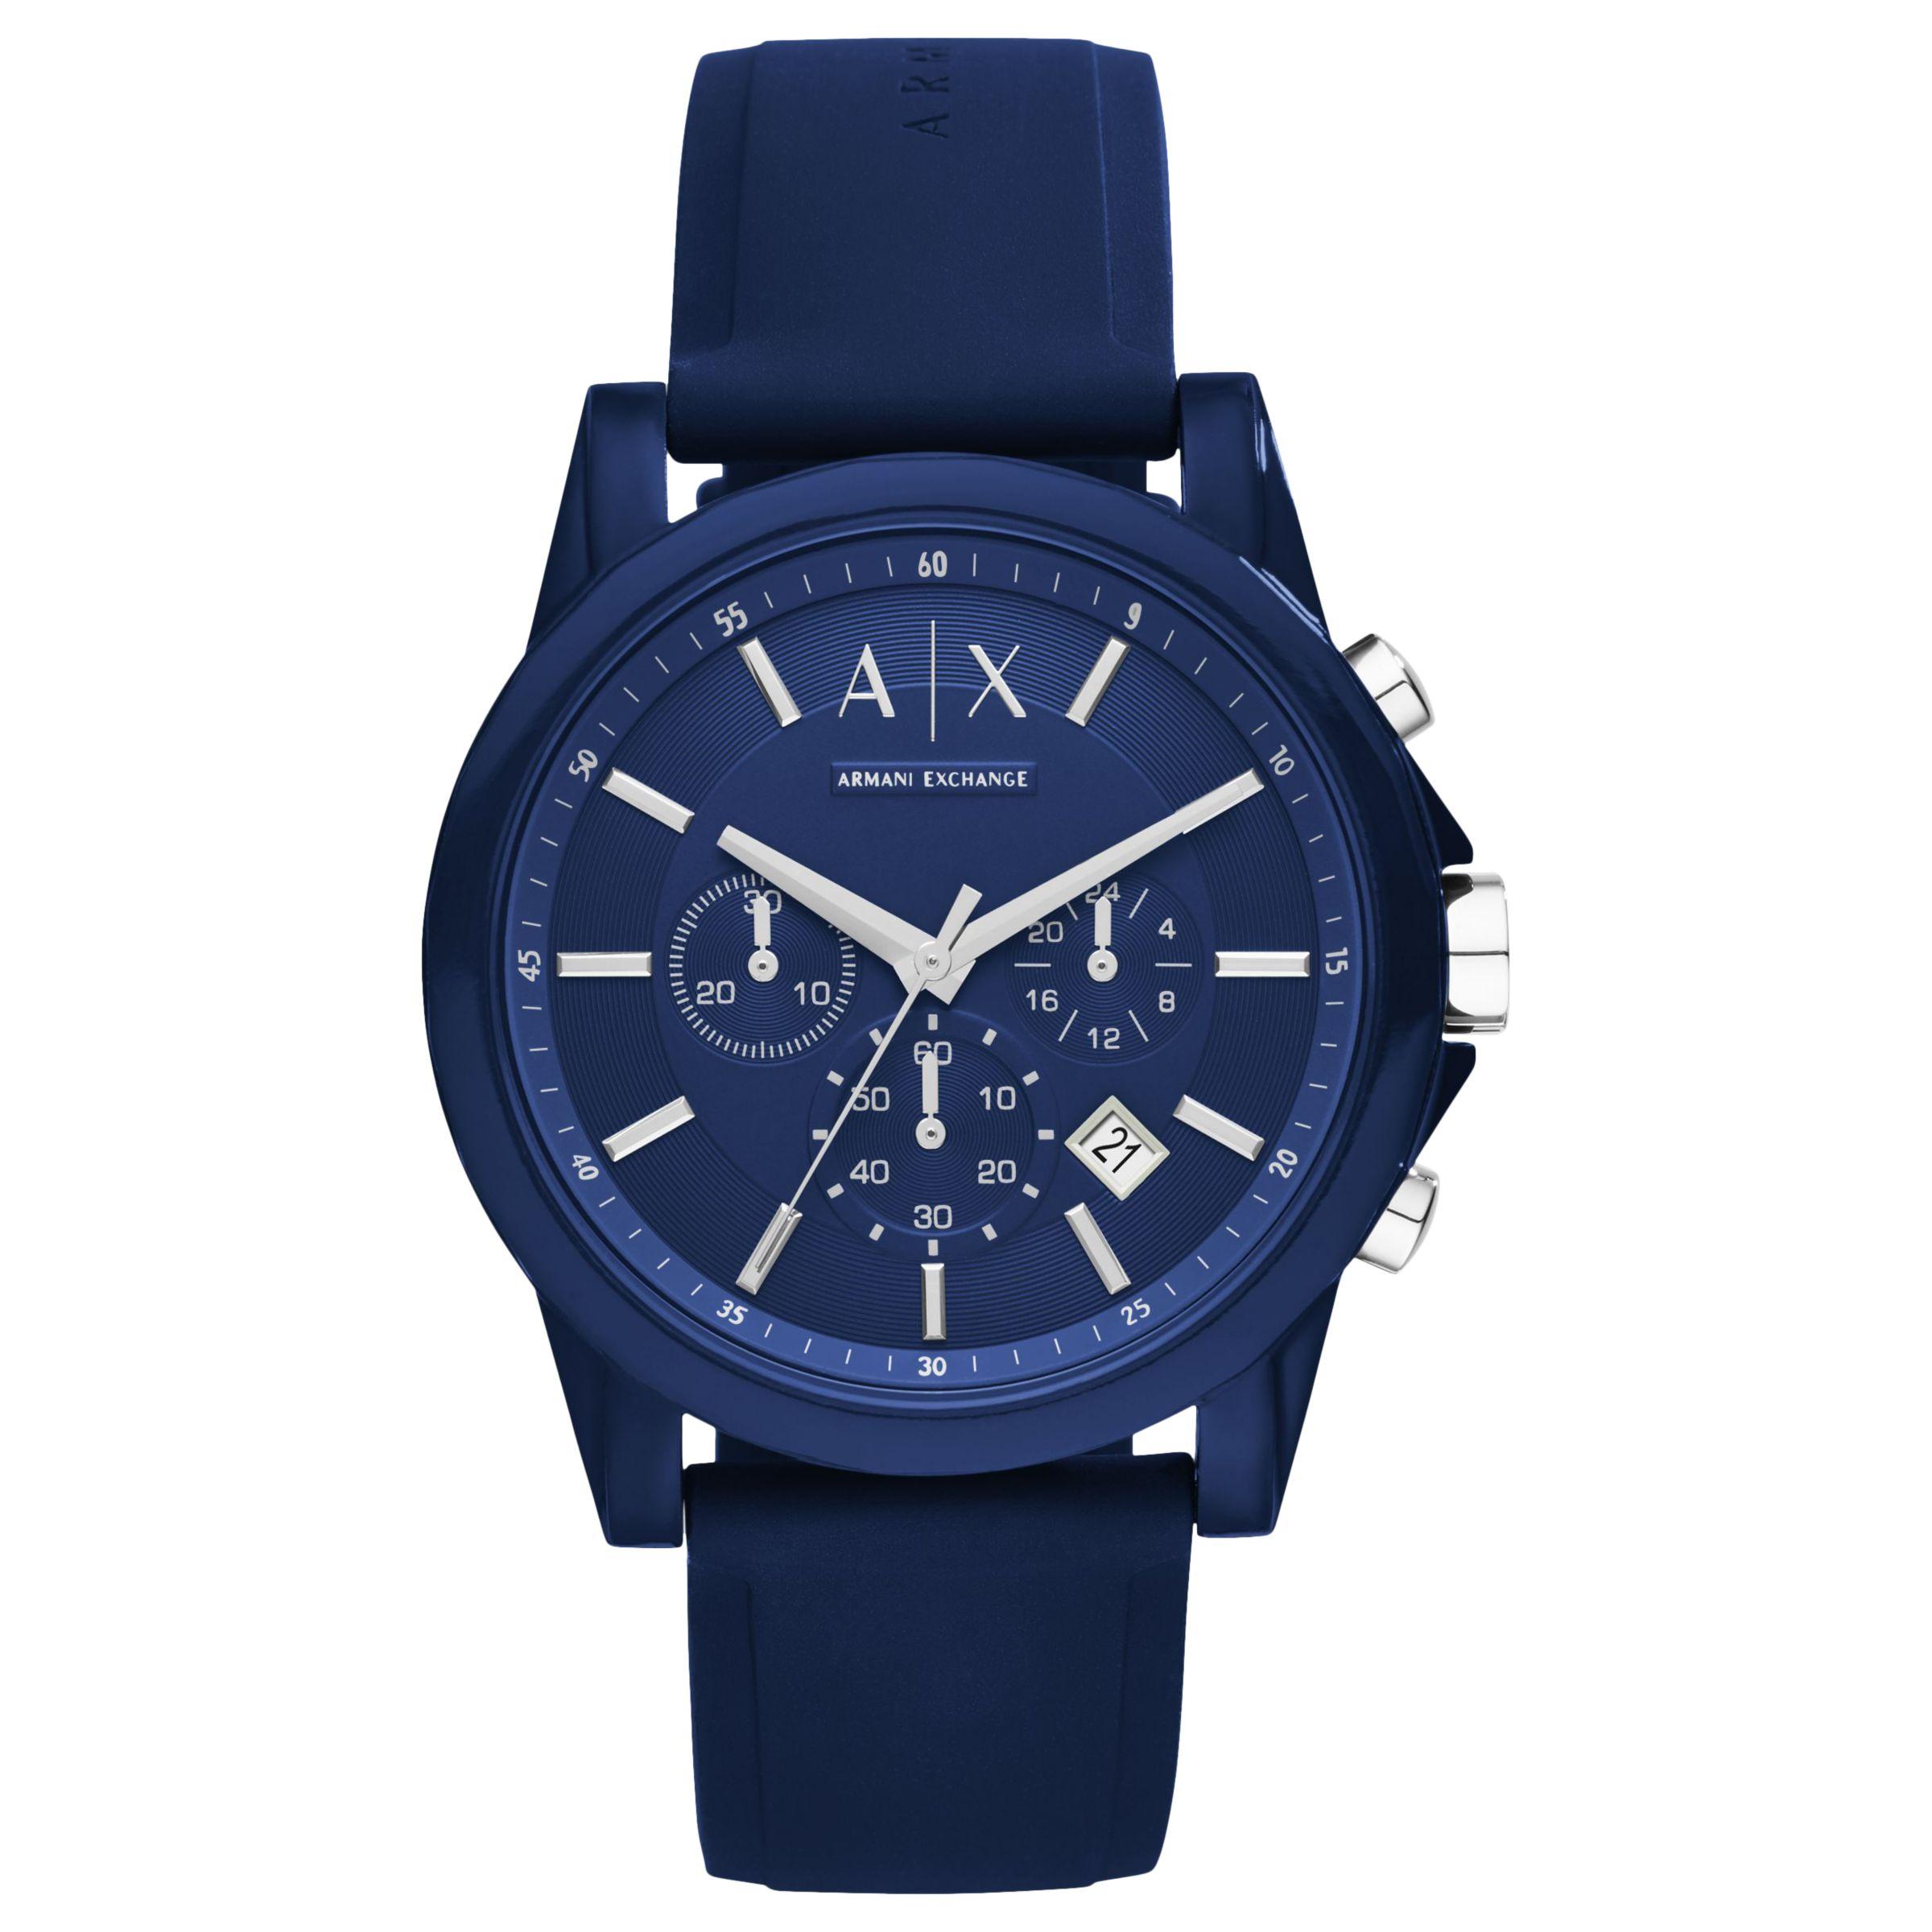 Armani Exchange Chronograph Silicone Strap Watch in Blue for Men - Lyst